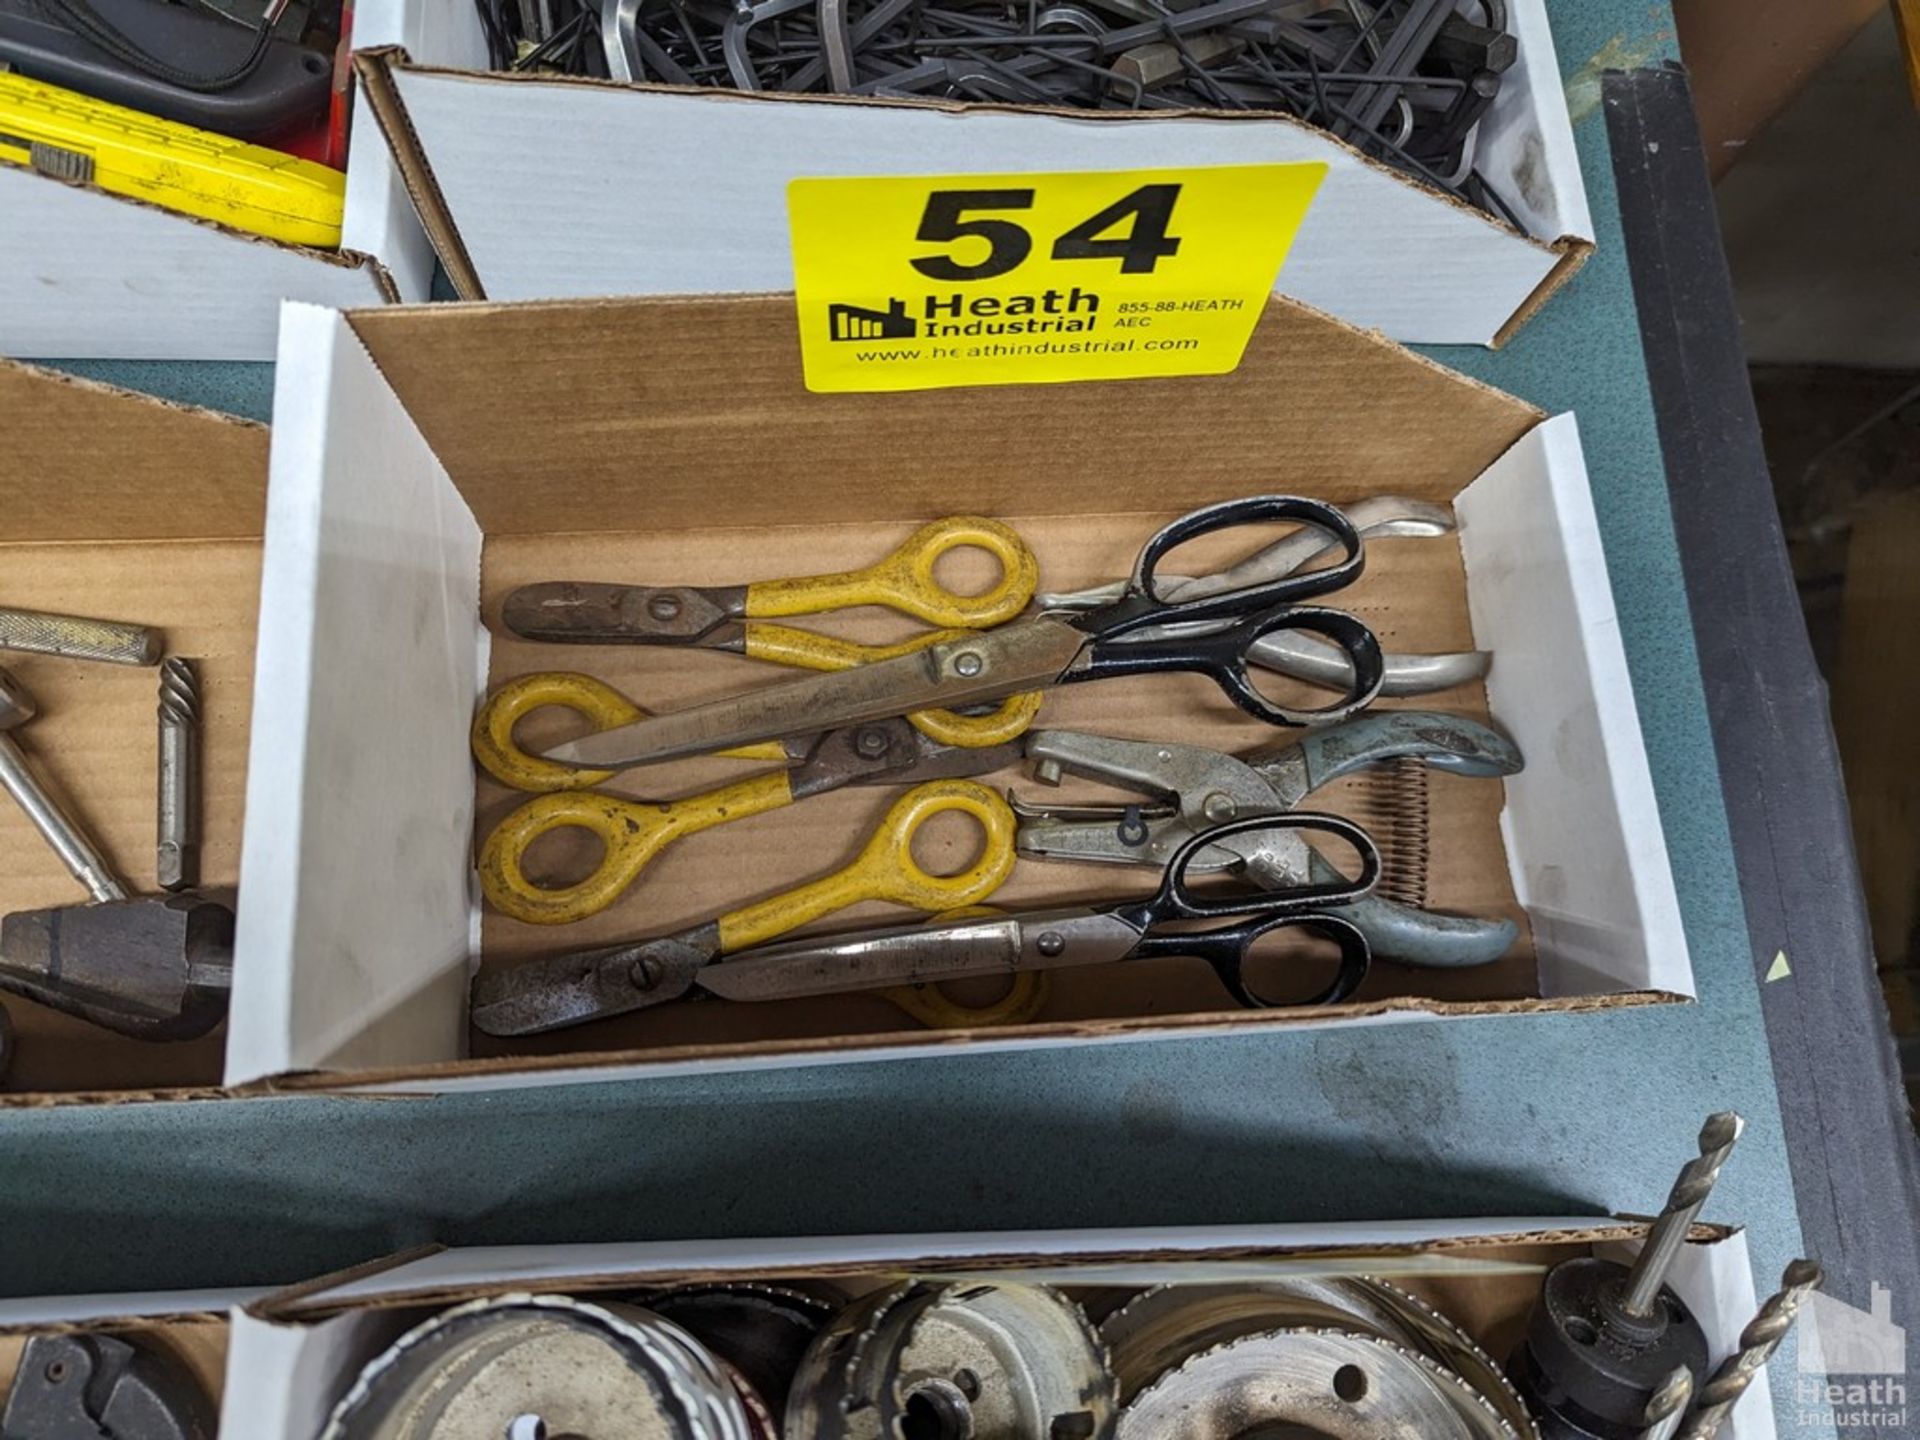 ASSORTED SHEARS, SCISSORS AND HOLE PUNCHES IN BOX